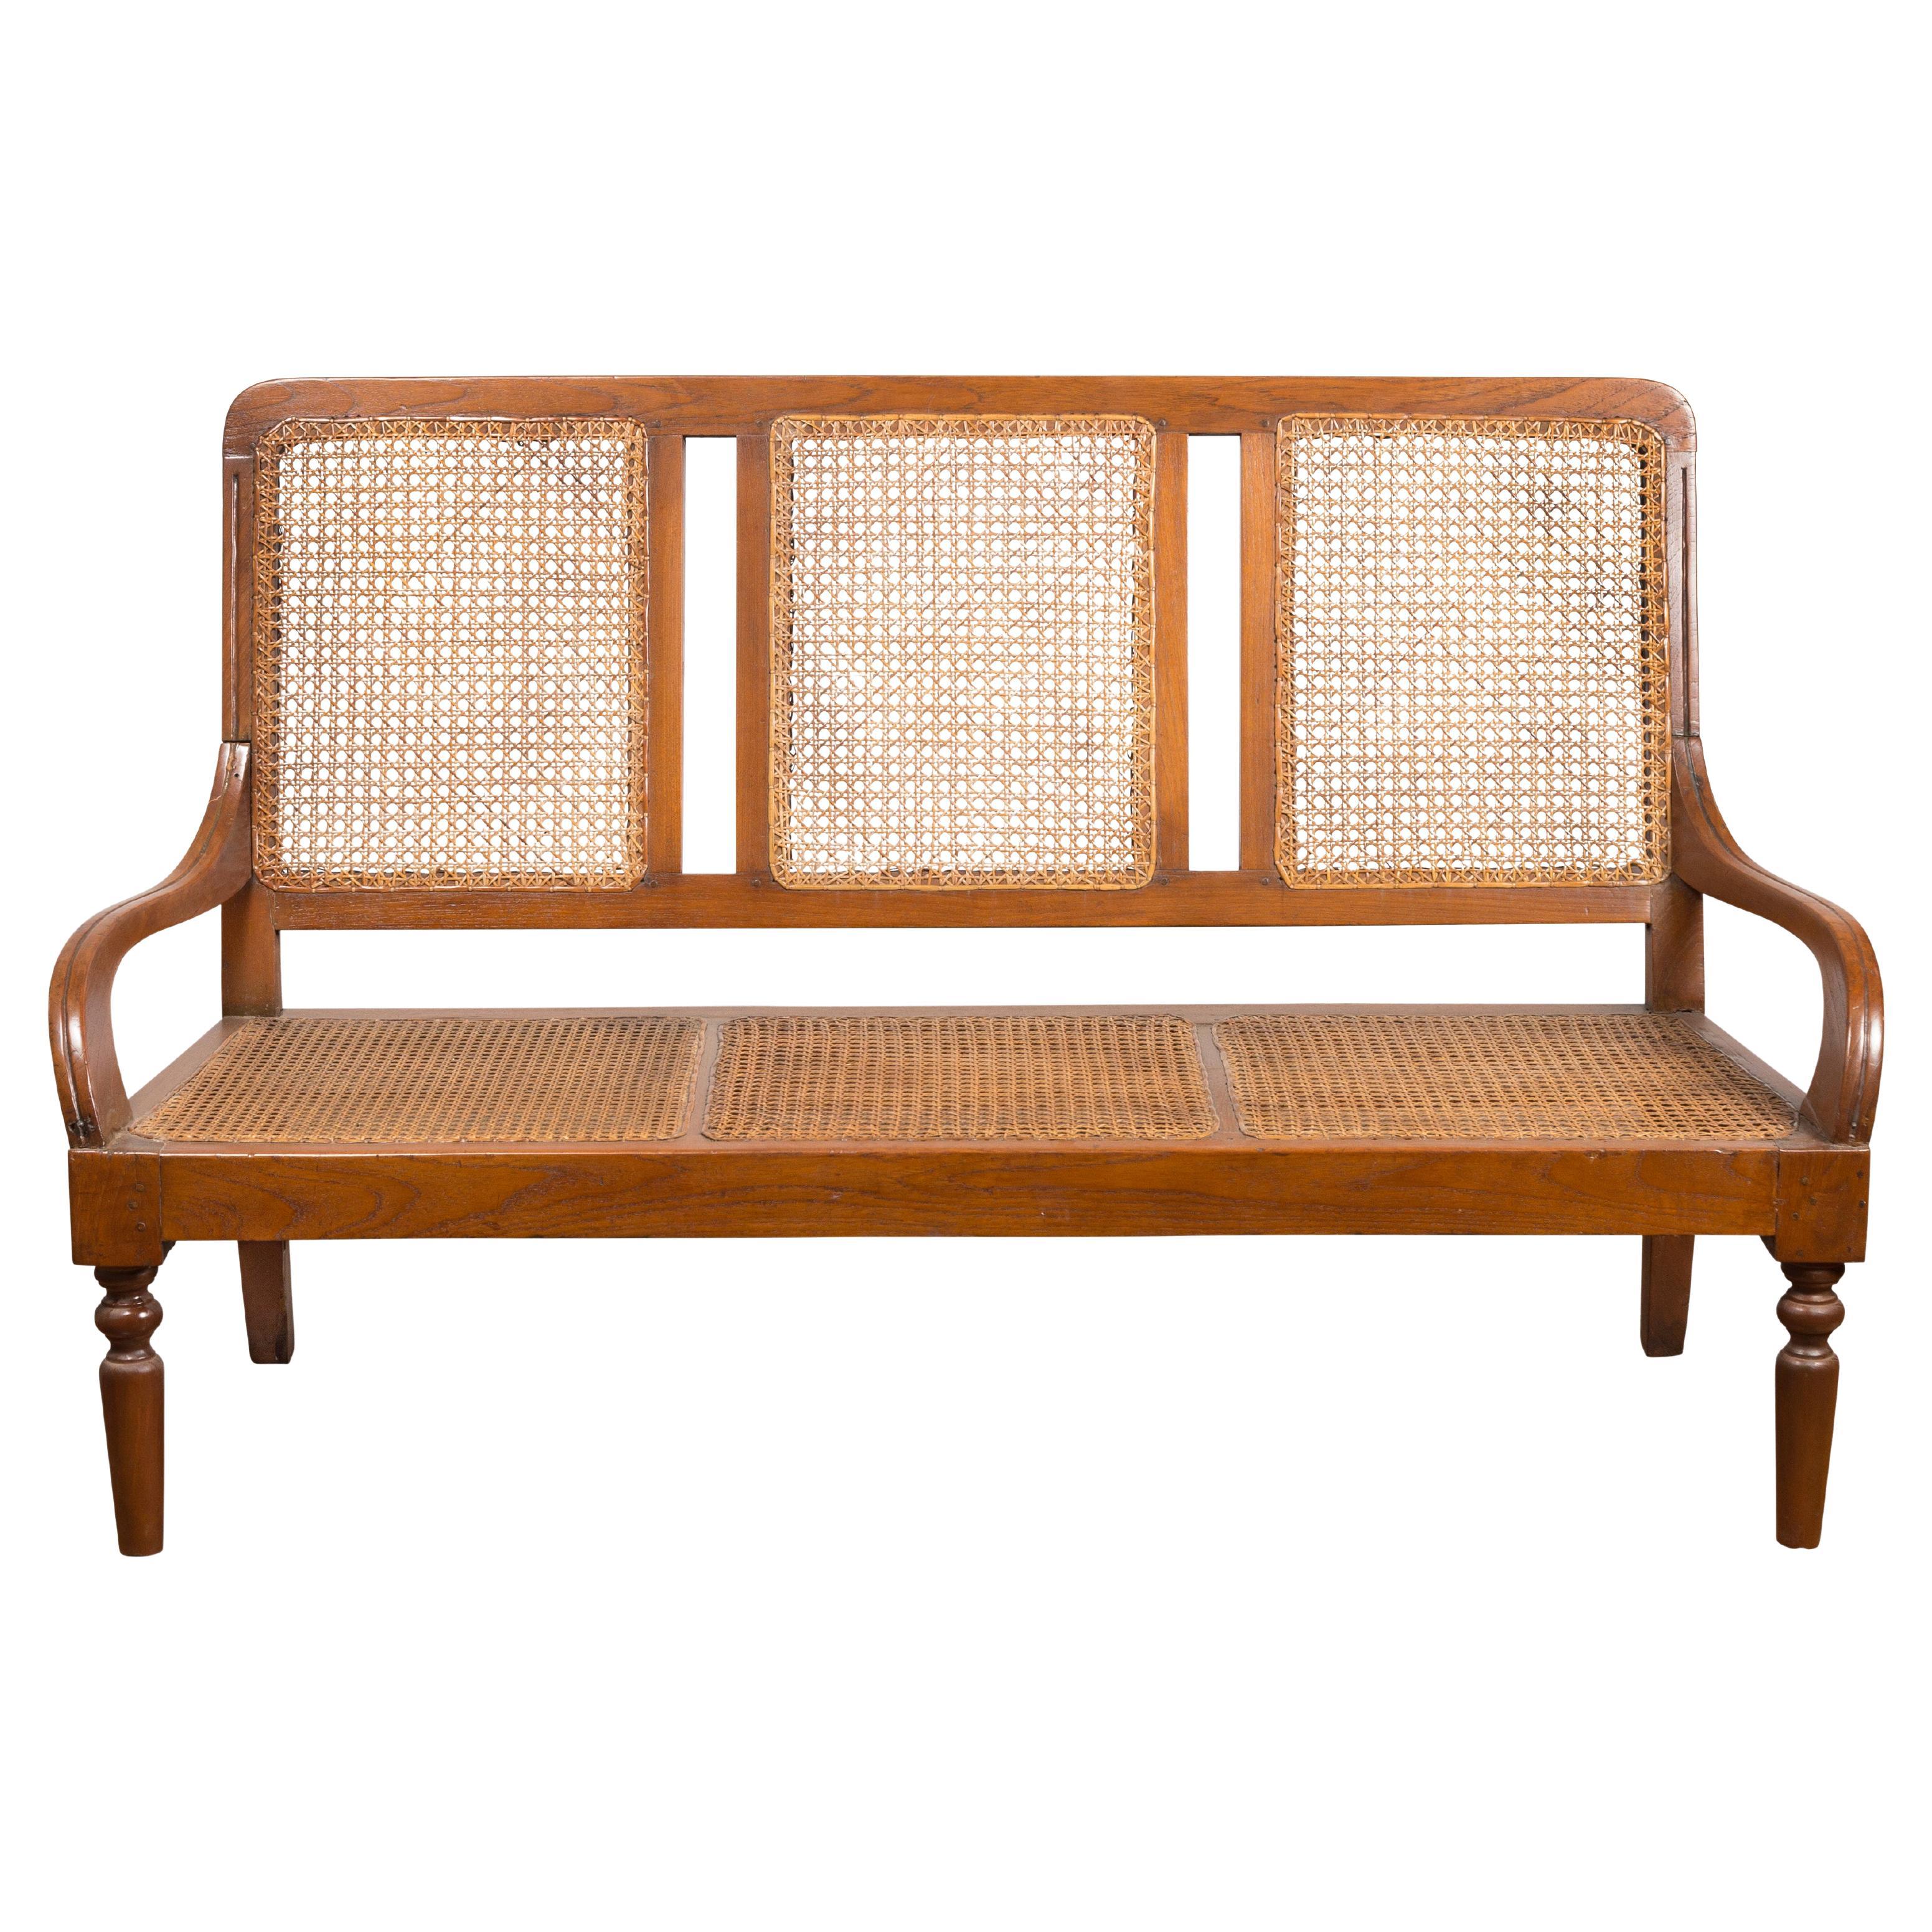 Woven Rattan Antique Settee For Sale